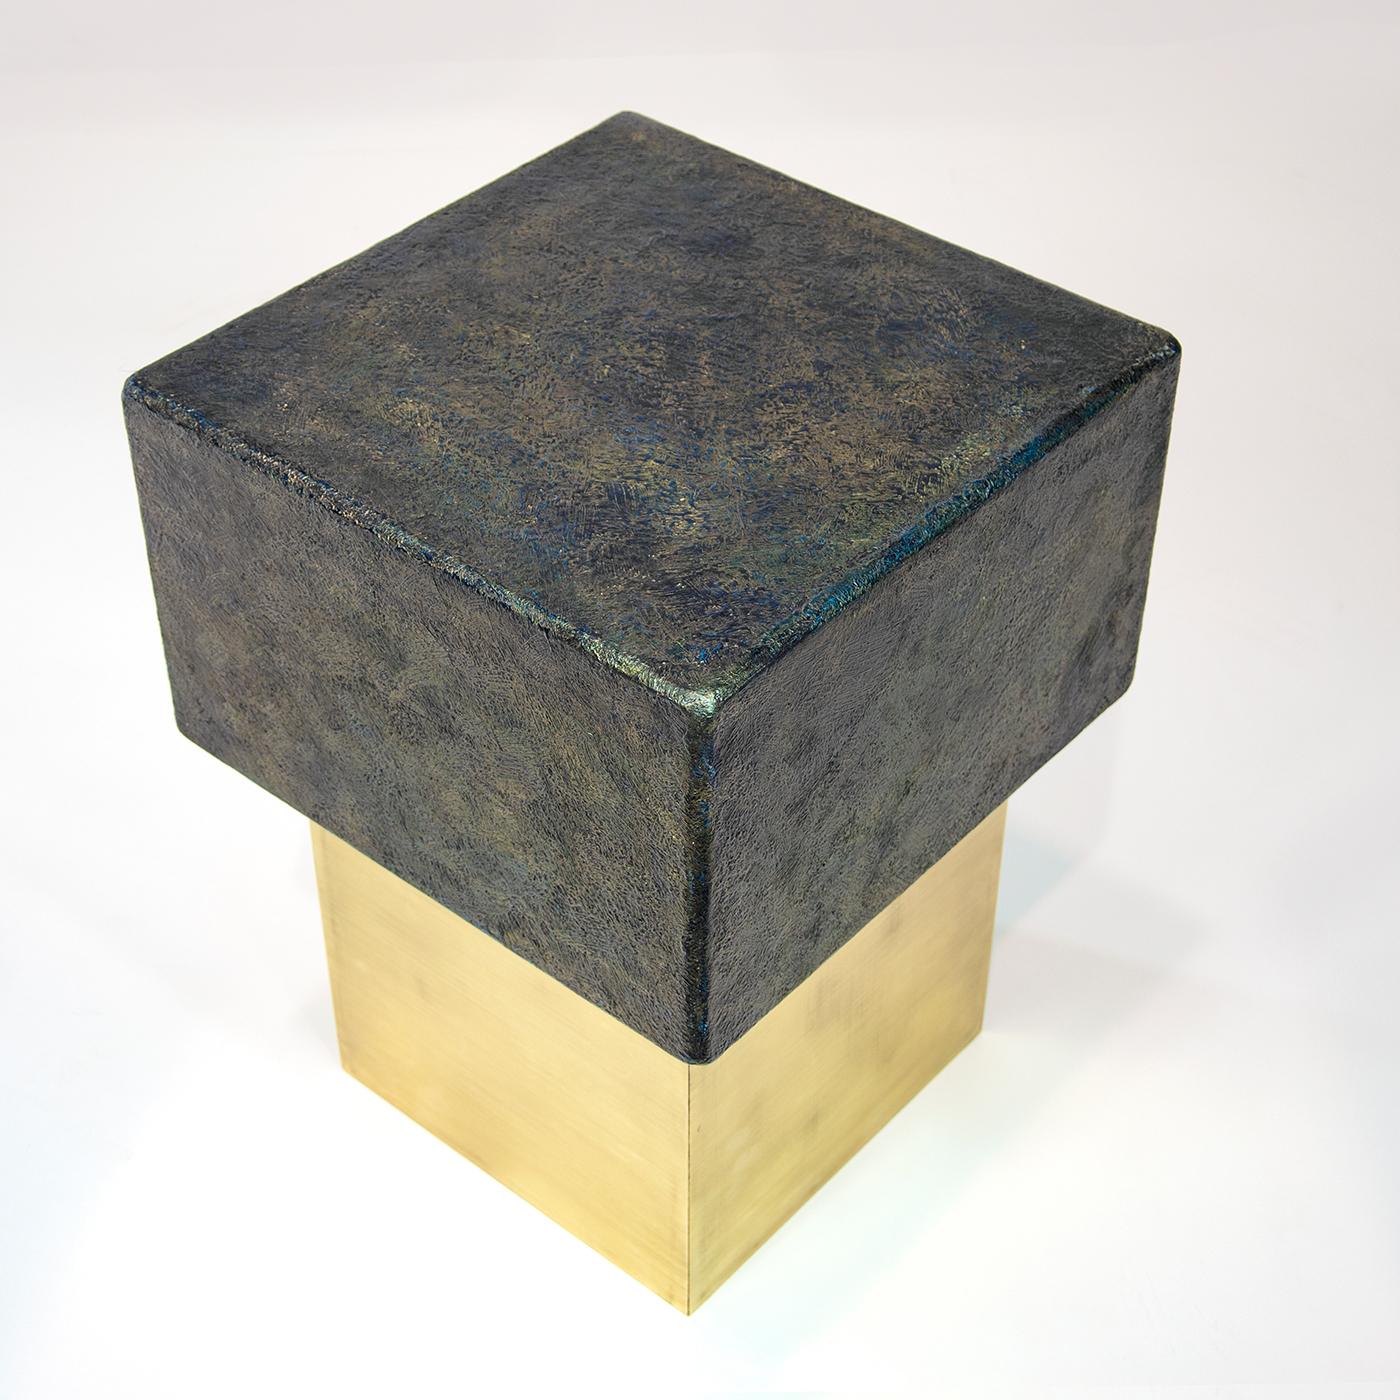 Wood and brass are the core elements of this stylish and contemporary small table, whose original design evokes the shape of a bottle stopper. Supported by a brass square base, the textured and metallic black patina finish of the square wooden top